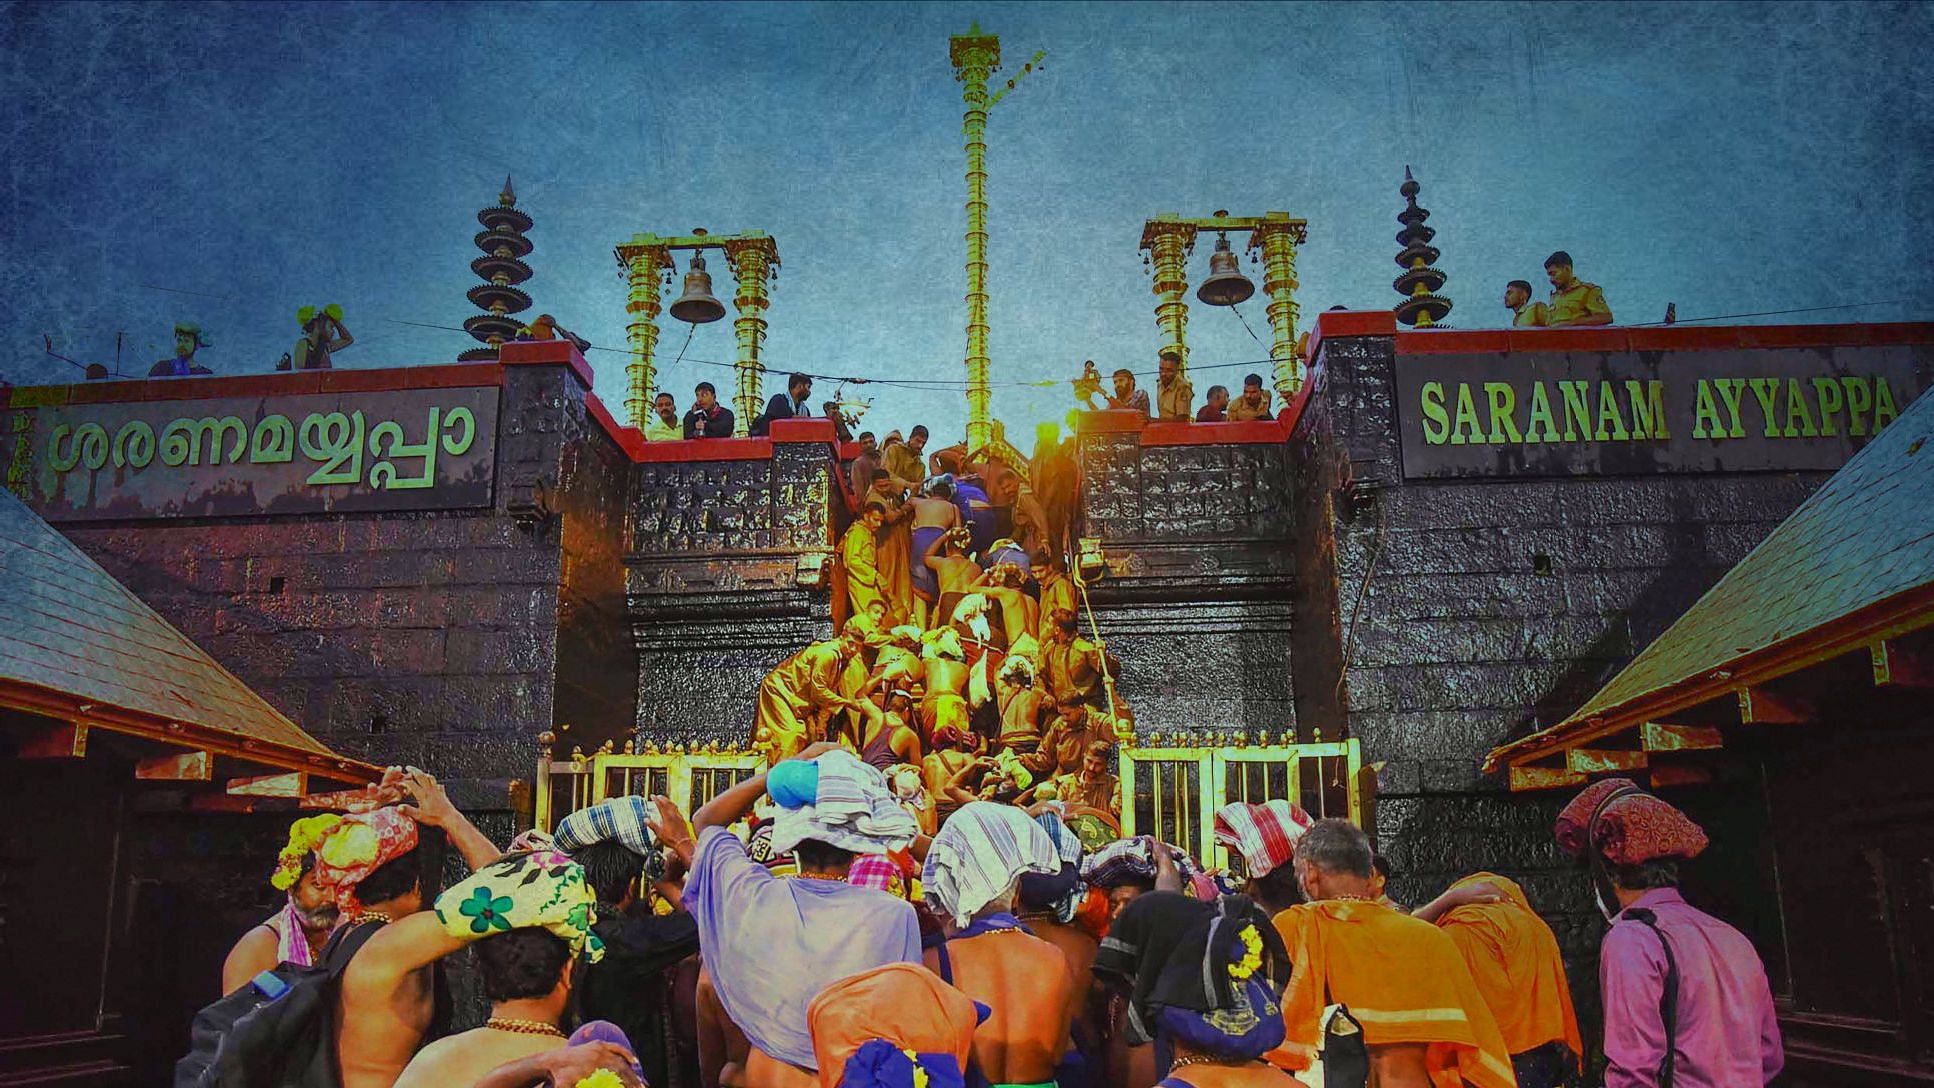 Catch all the updates of the Sabarimala review petitions’ hearing on The Quint.